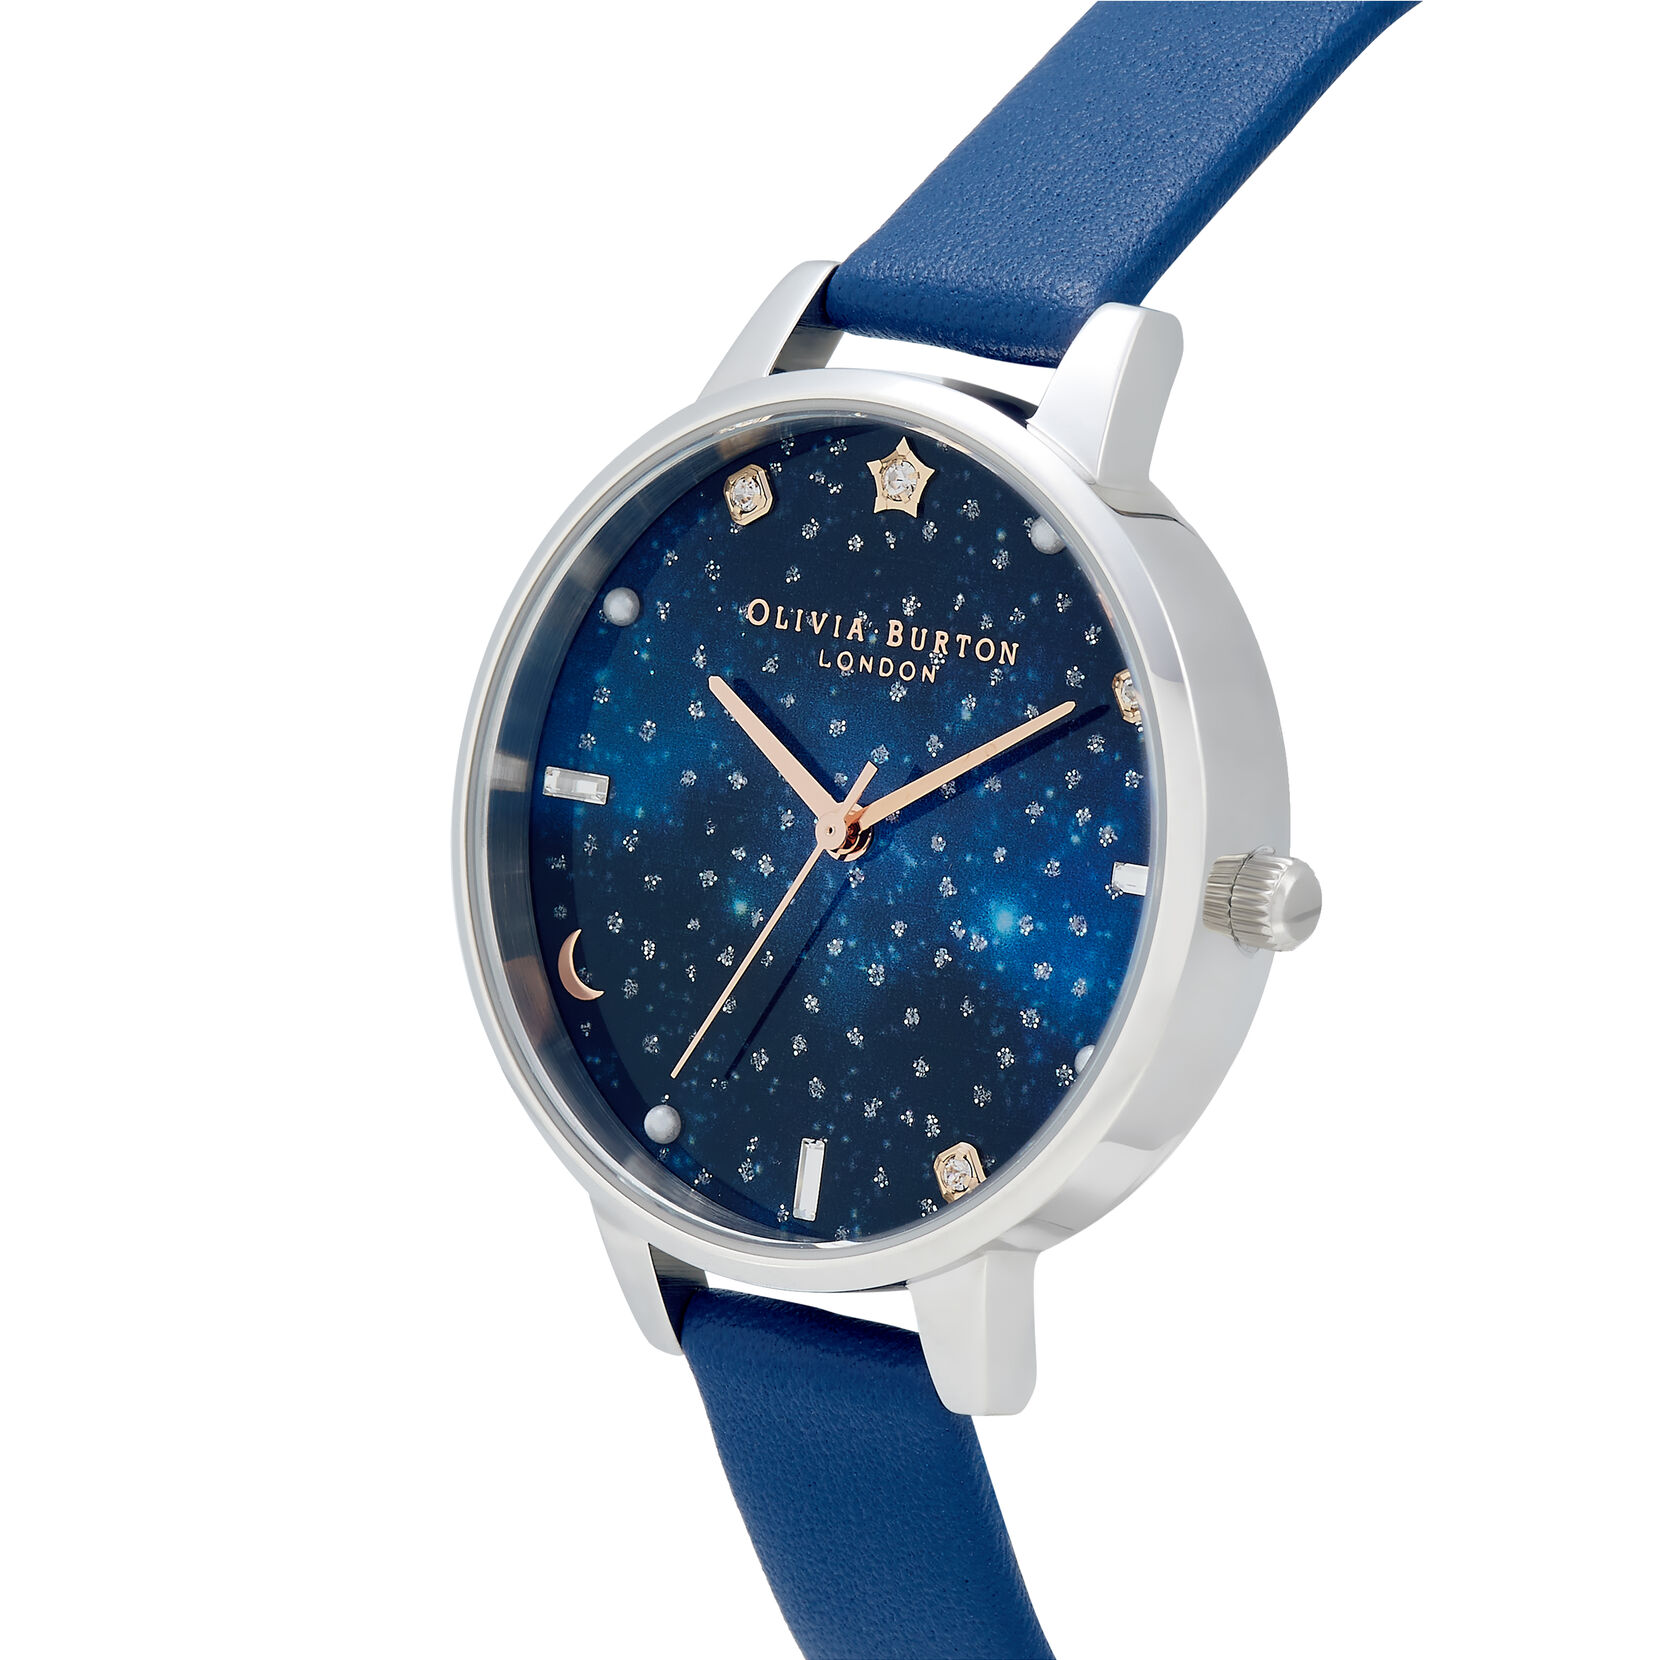 Celestial 34mm Silver & Blue Leather Strap Watch